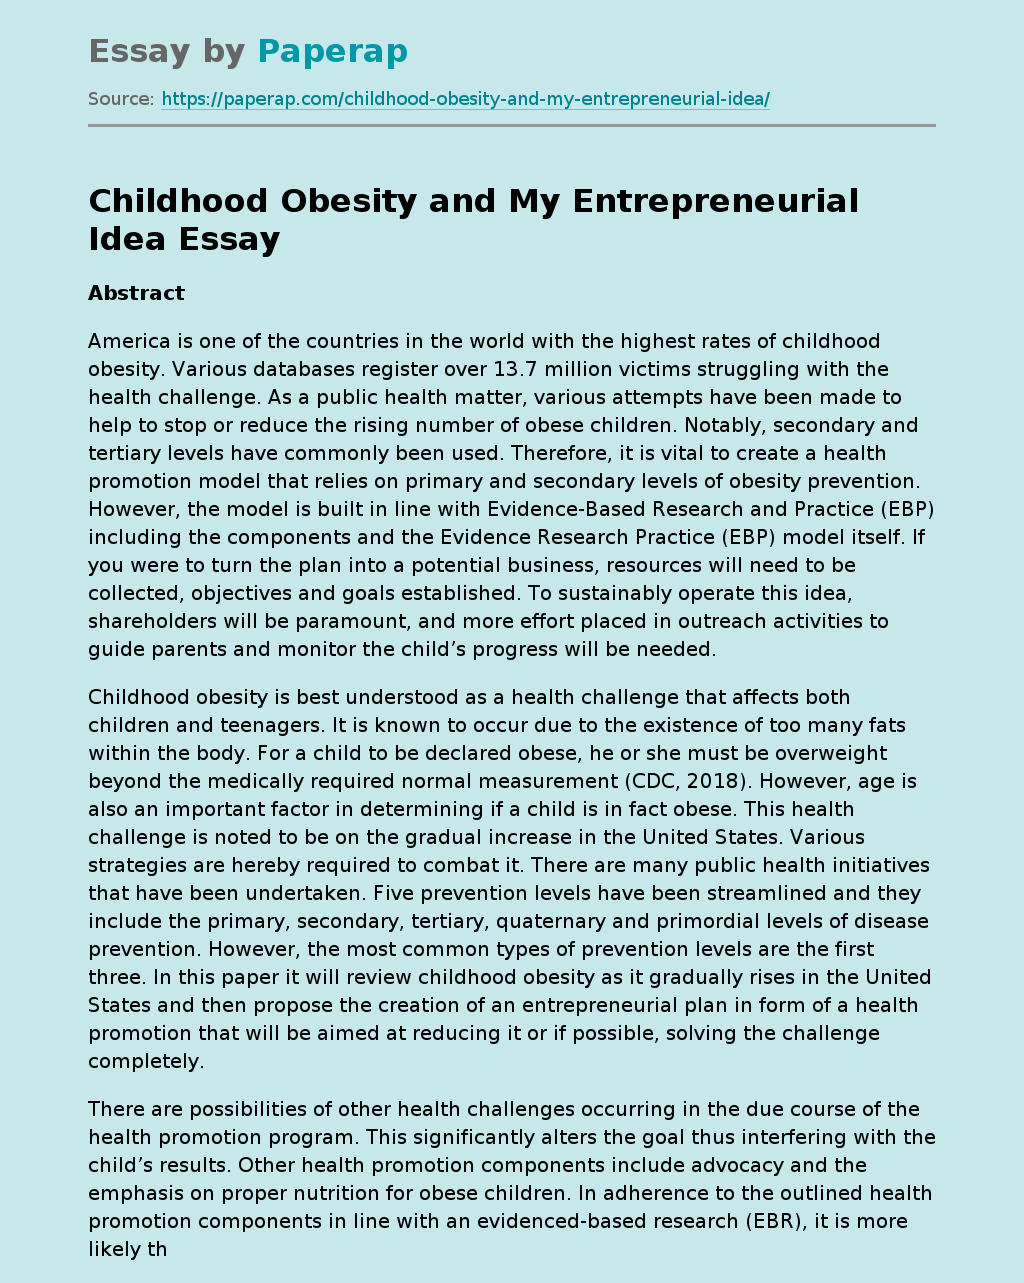 Childhood Obesity and My Entrepreneurial Idea